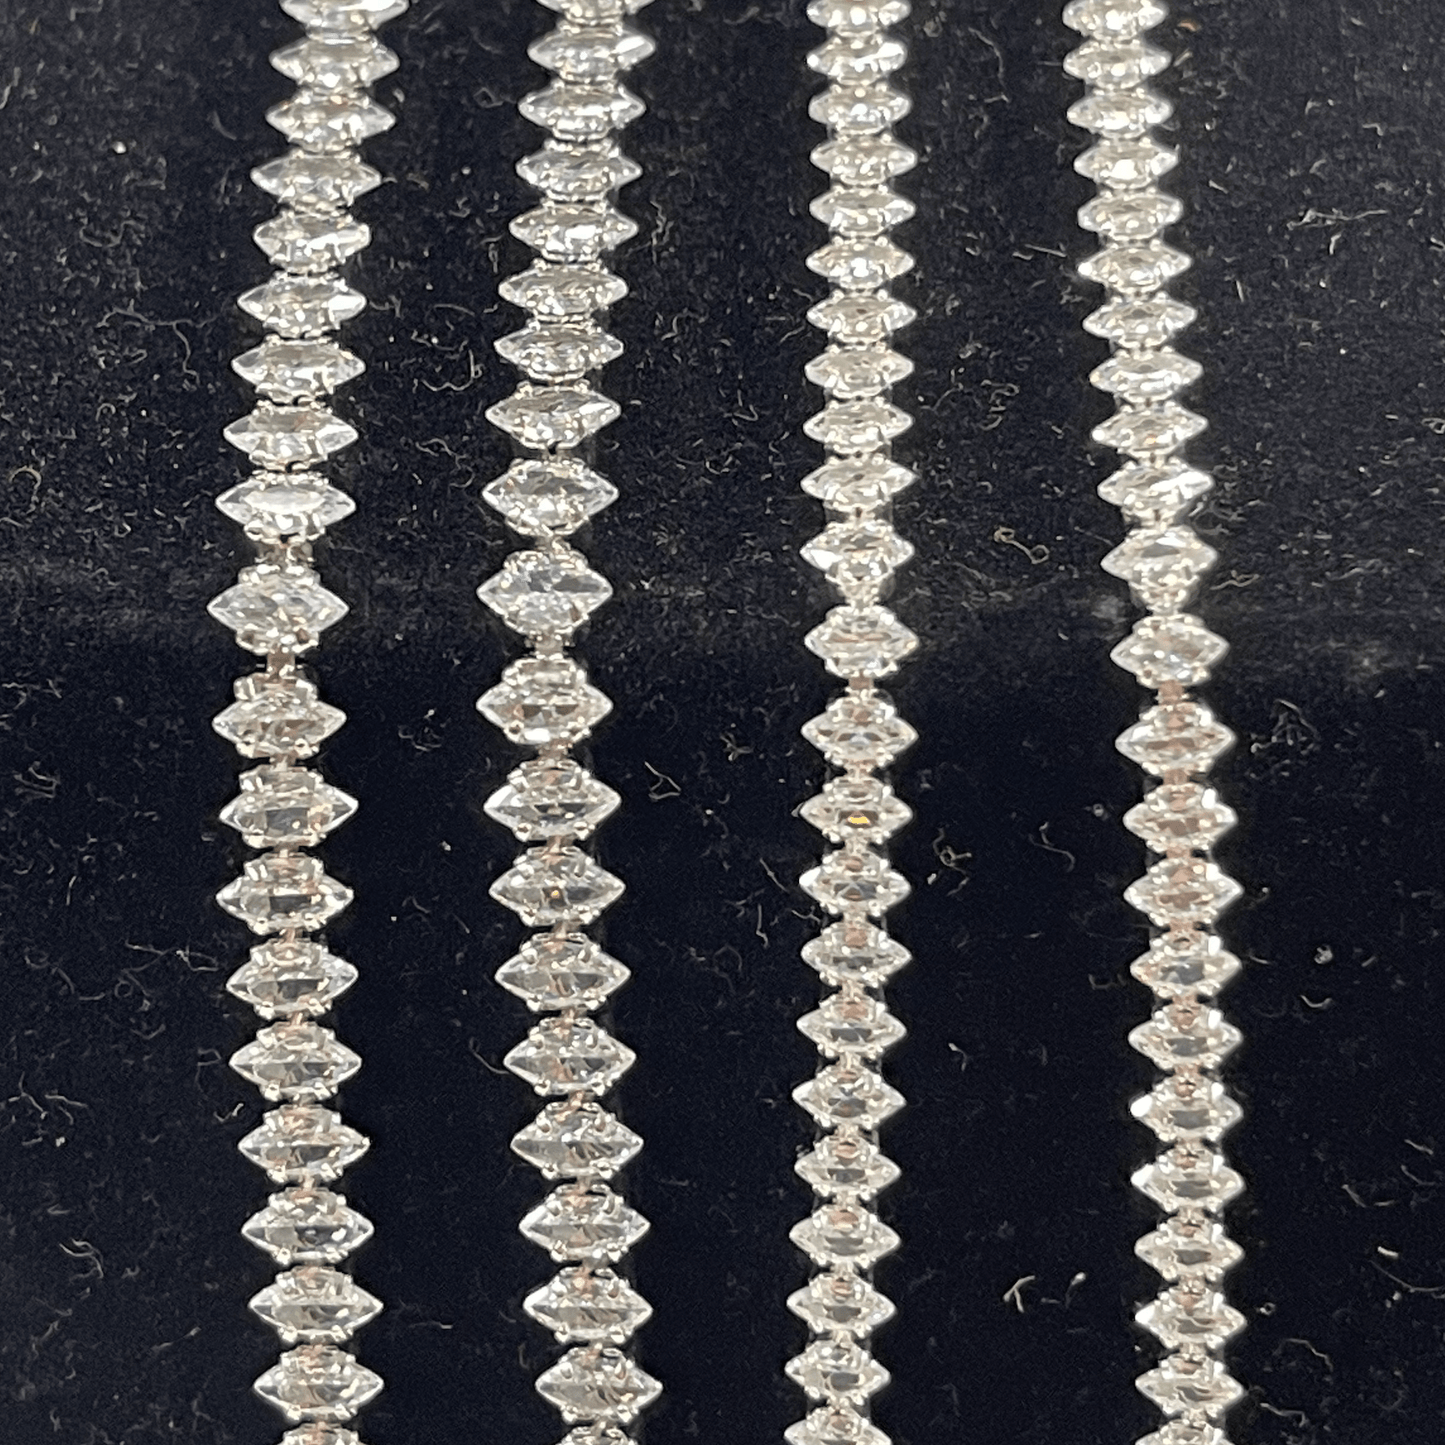 3*5mm & 3*4mm CLEAR DIAMOND STONE with Silver Rhinestone HIGH QUALITY Metal Chain, Sold in 18" *RARE* SS6 Metal Rhinestone Chain